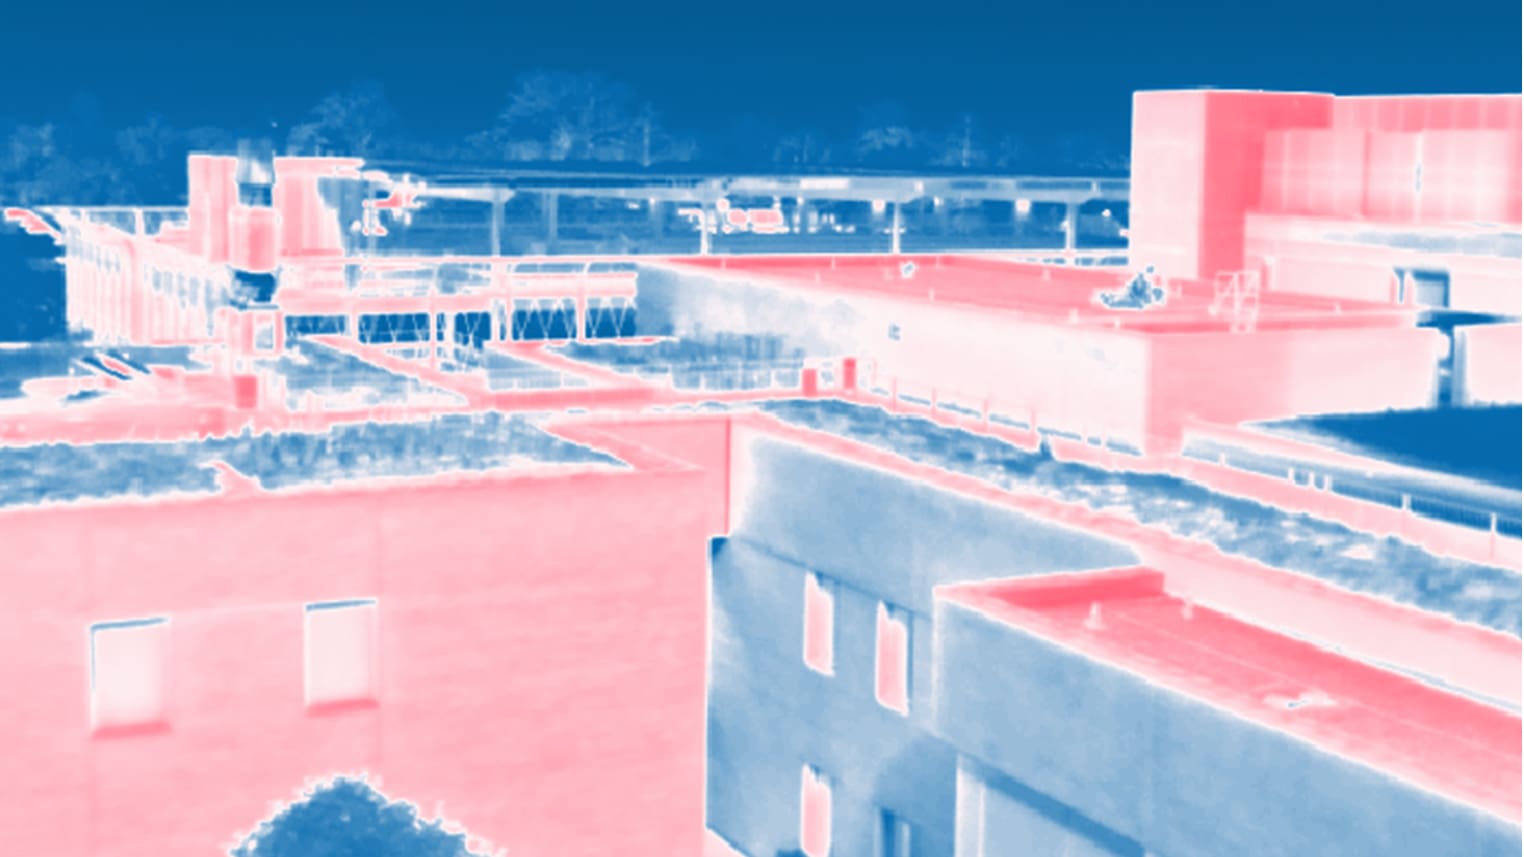 Infrared image of buildings roofs and walls